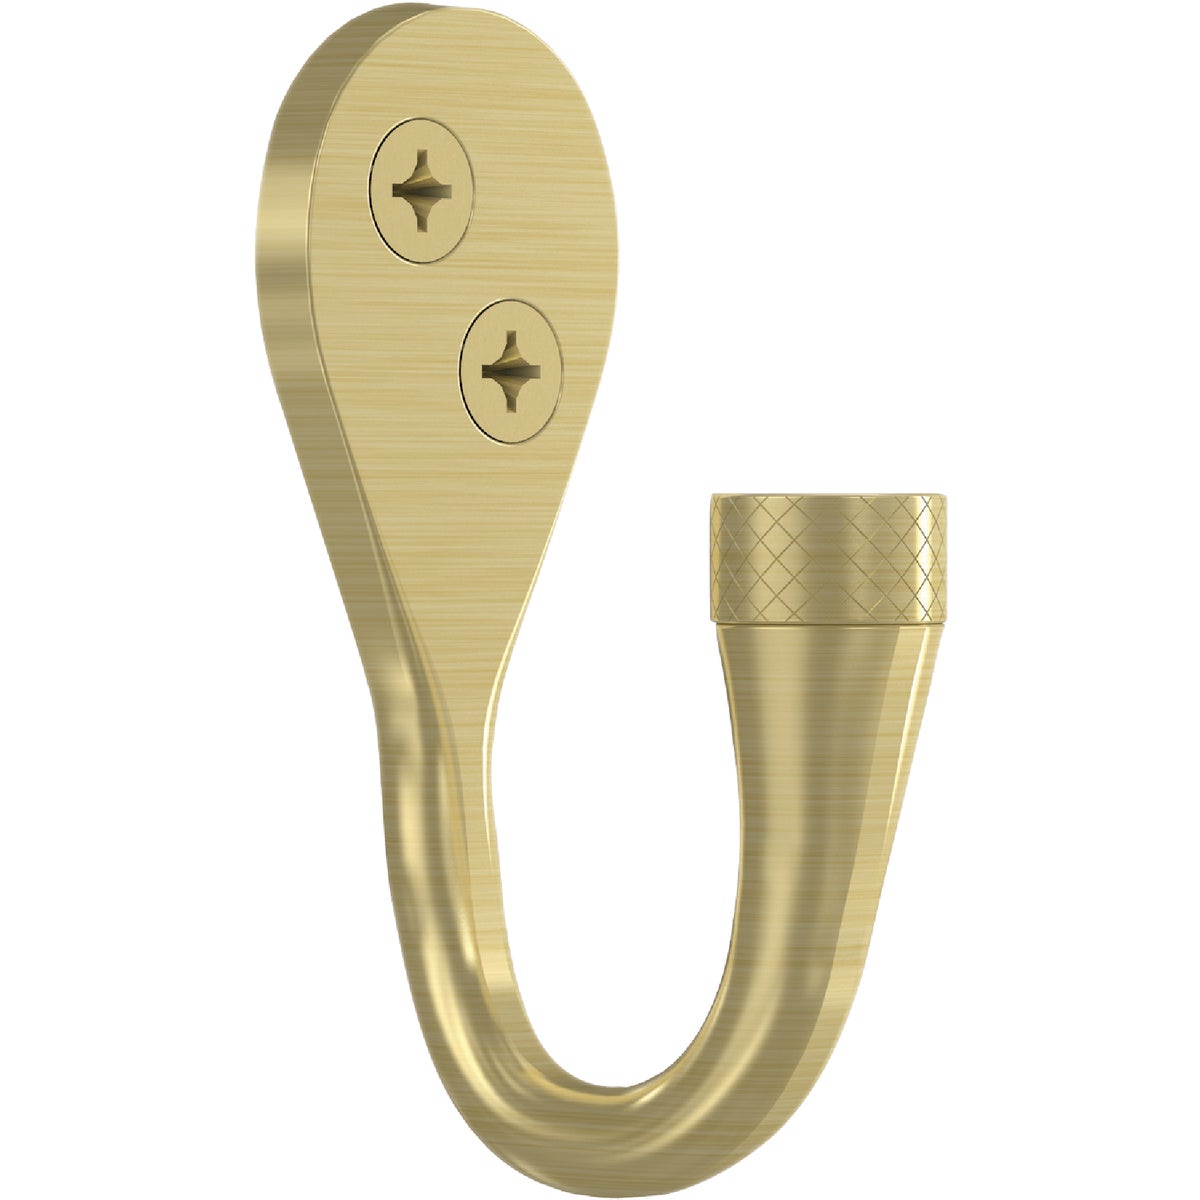 National Hardware 2-5/8 In. Brushed Gold Powell Knurled Hook (2-Pack)